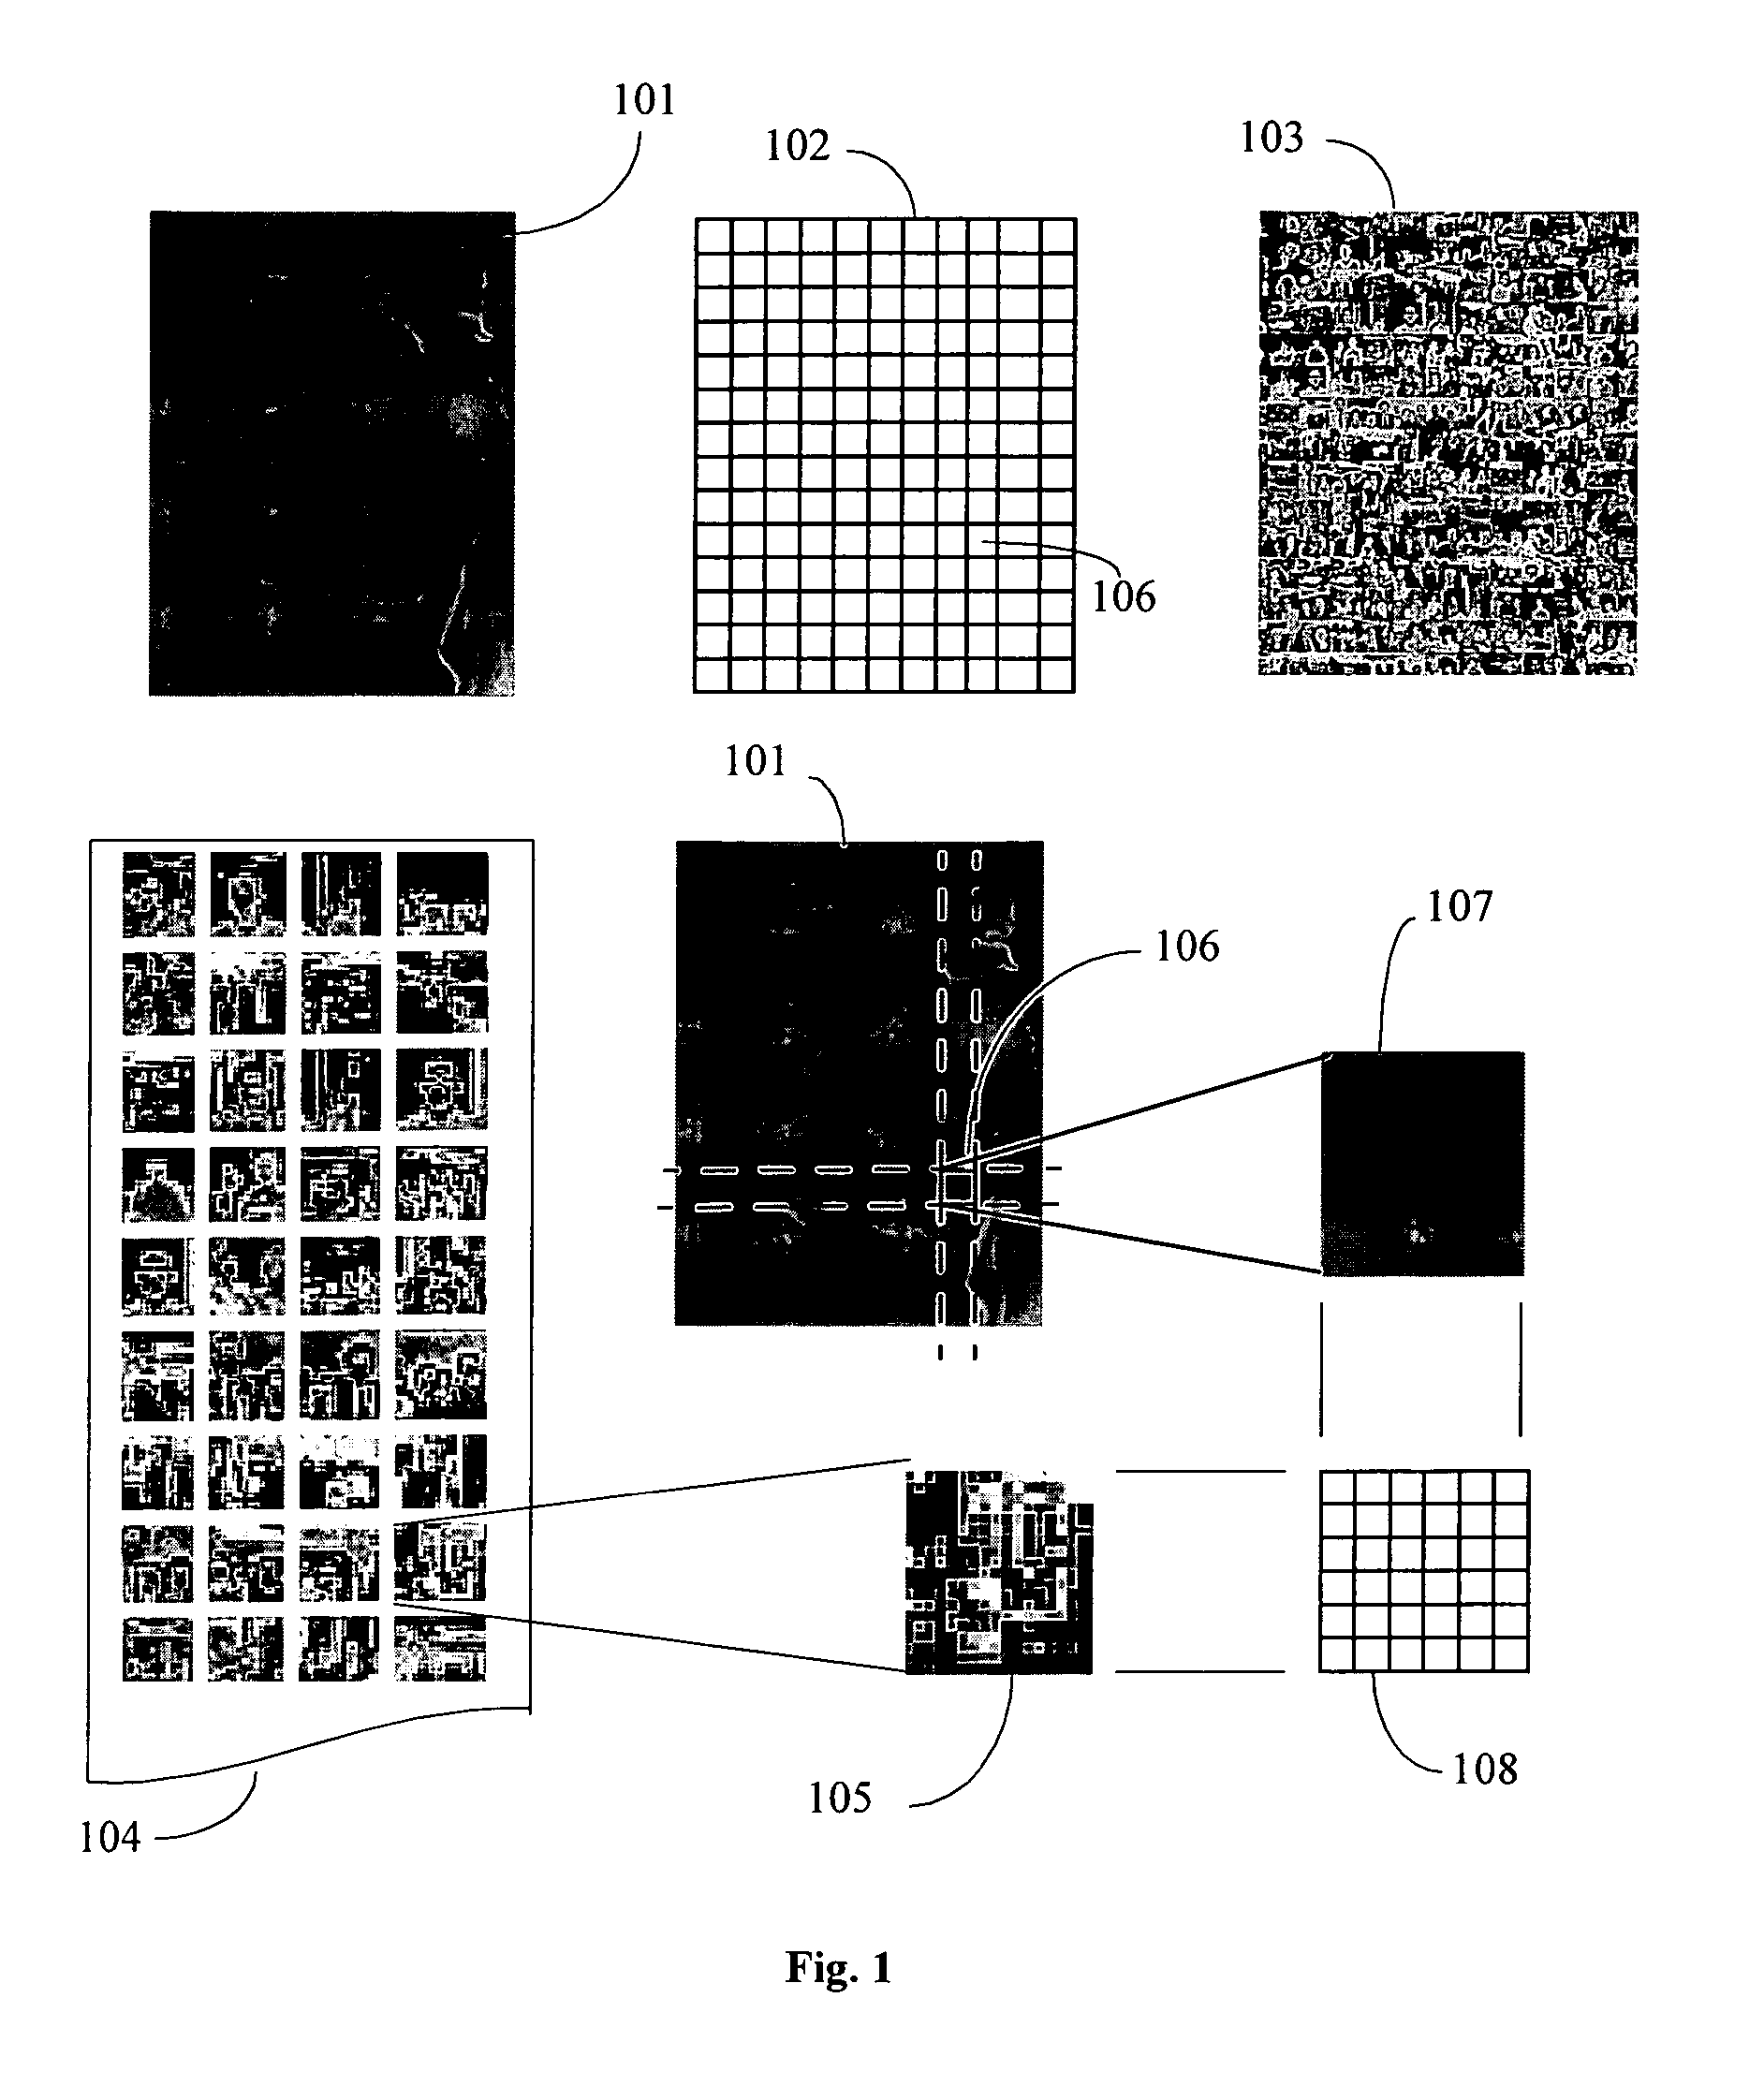 Digital composition of a mosaic image